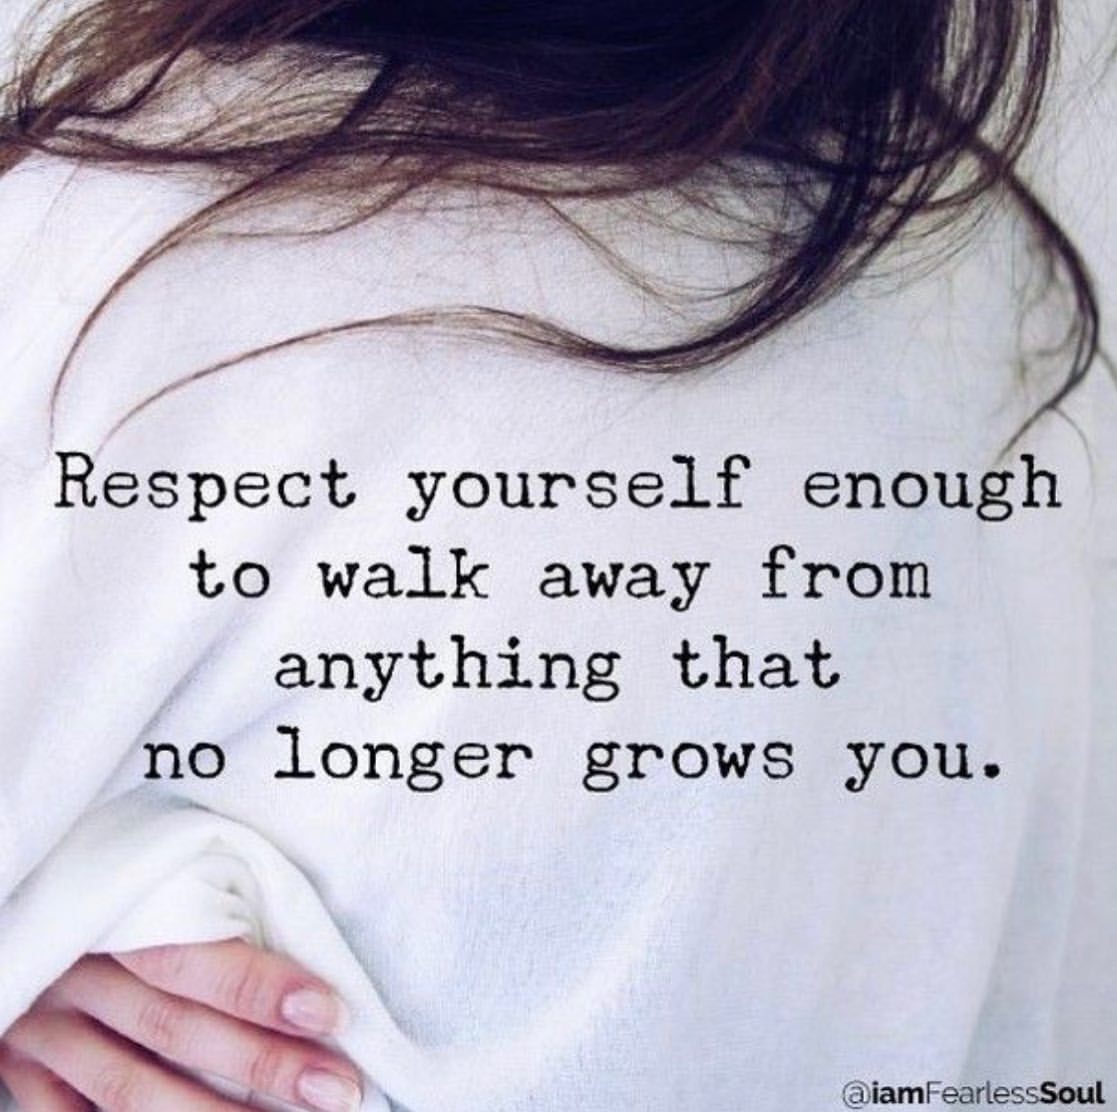 Respect yourself enough to walk away from anything that no longer grows you.